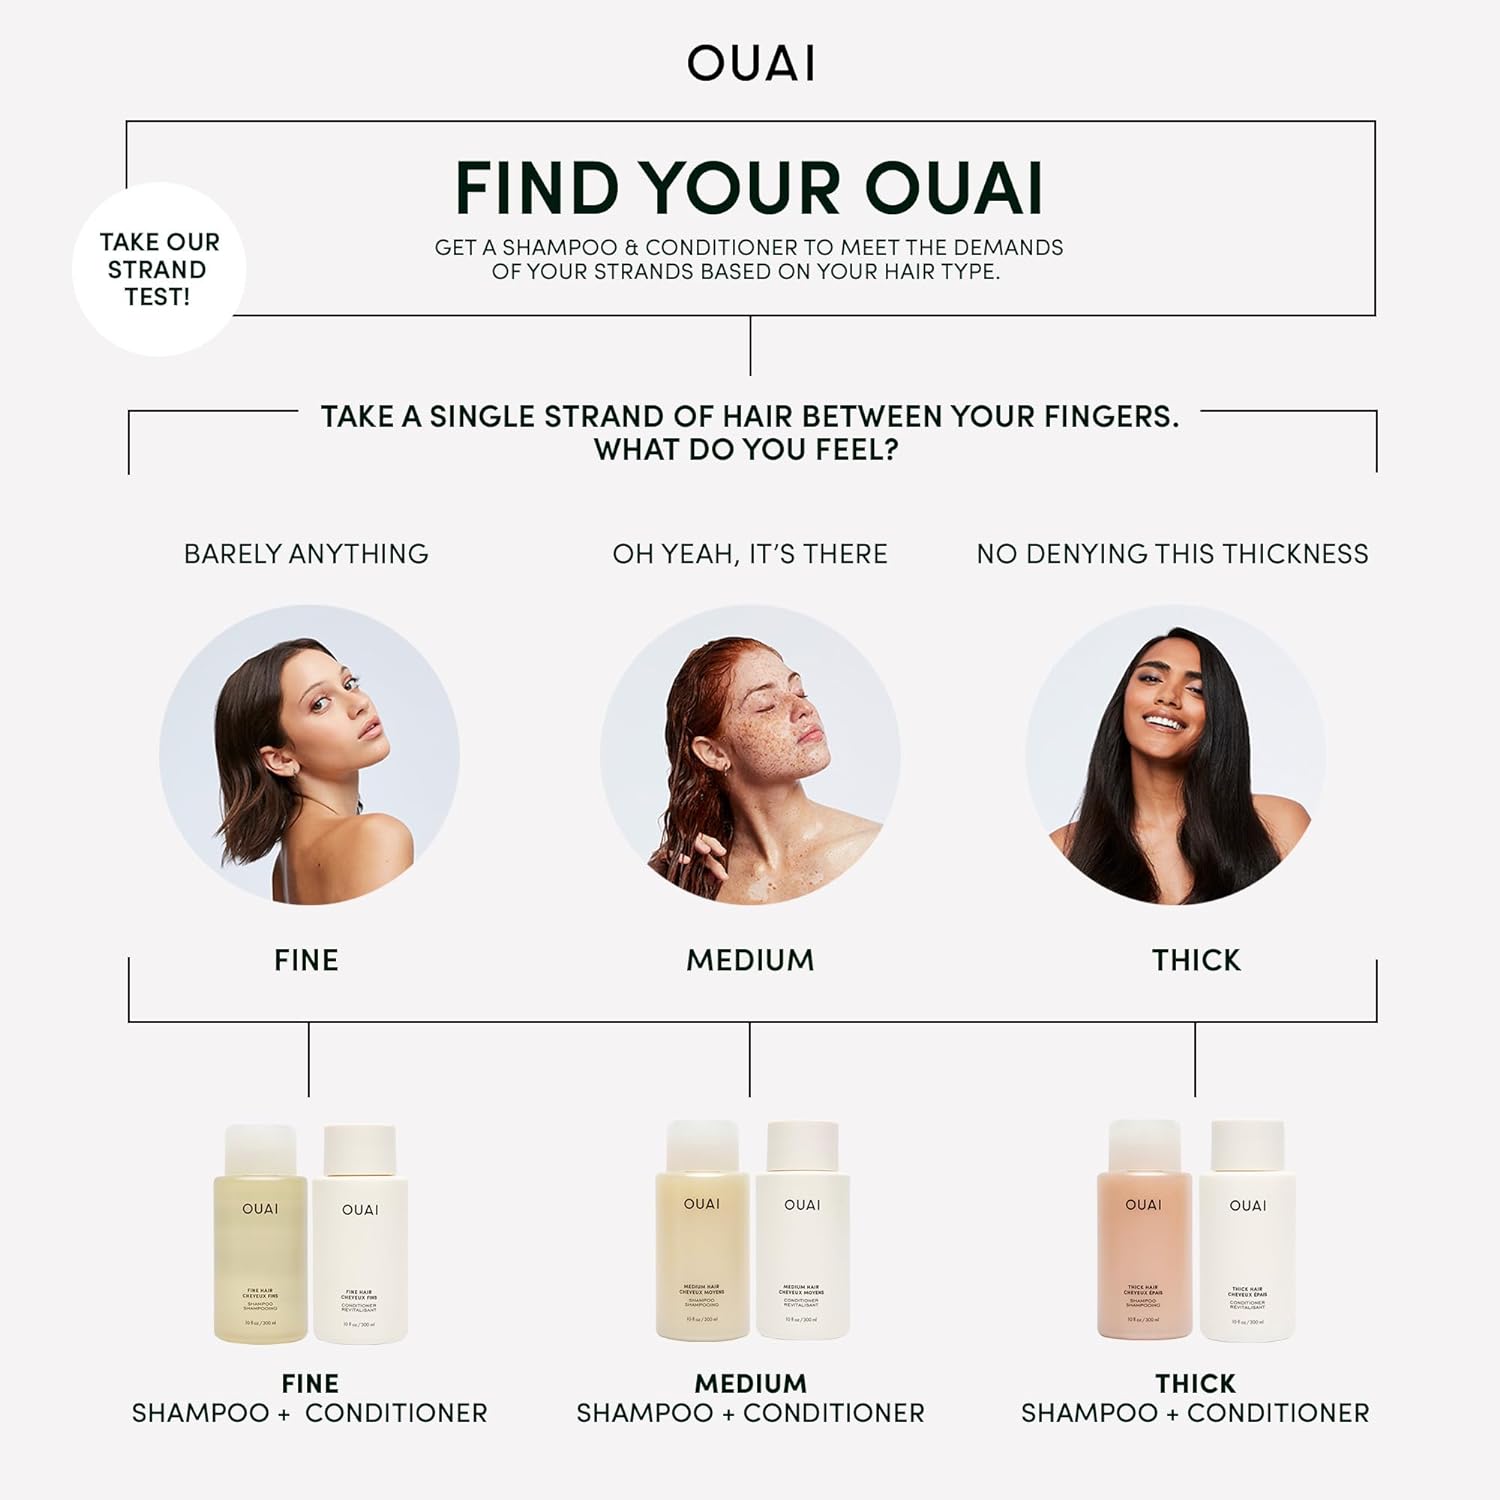 OUAI Thick Hair Bundle - Conditioner, Shampoo & Hair Treatment Masque Formulated with Almond Oil, Olive Oil & Hydrolyzed Keratin - Paraben, Phthalate and Sulfate Free Hair Care (10 Oz/10 Oz/8 Fl Oz) : Beauty & Personal Care